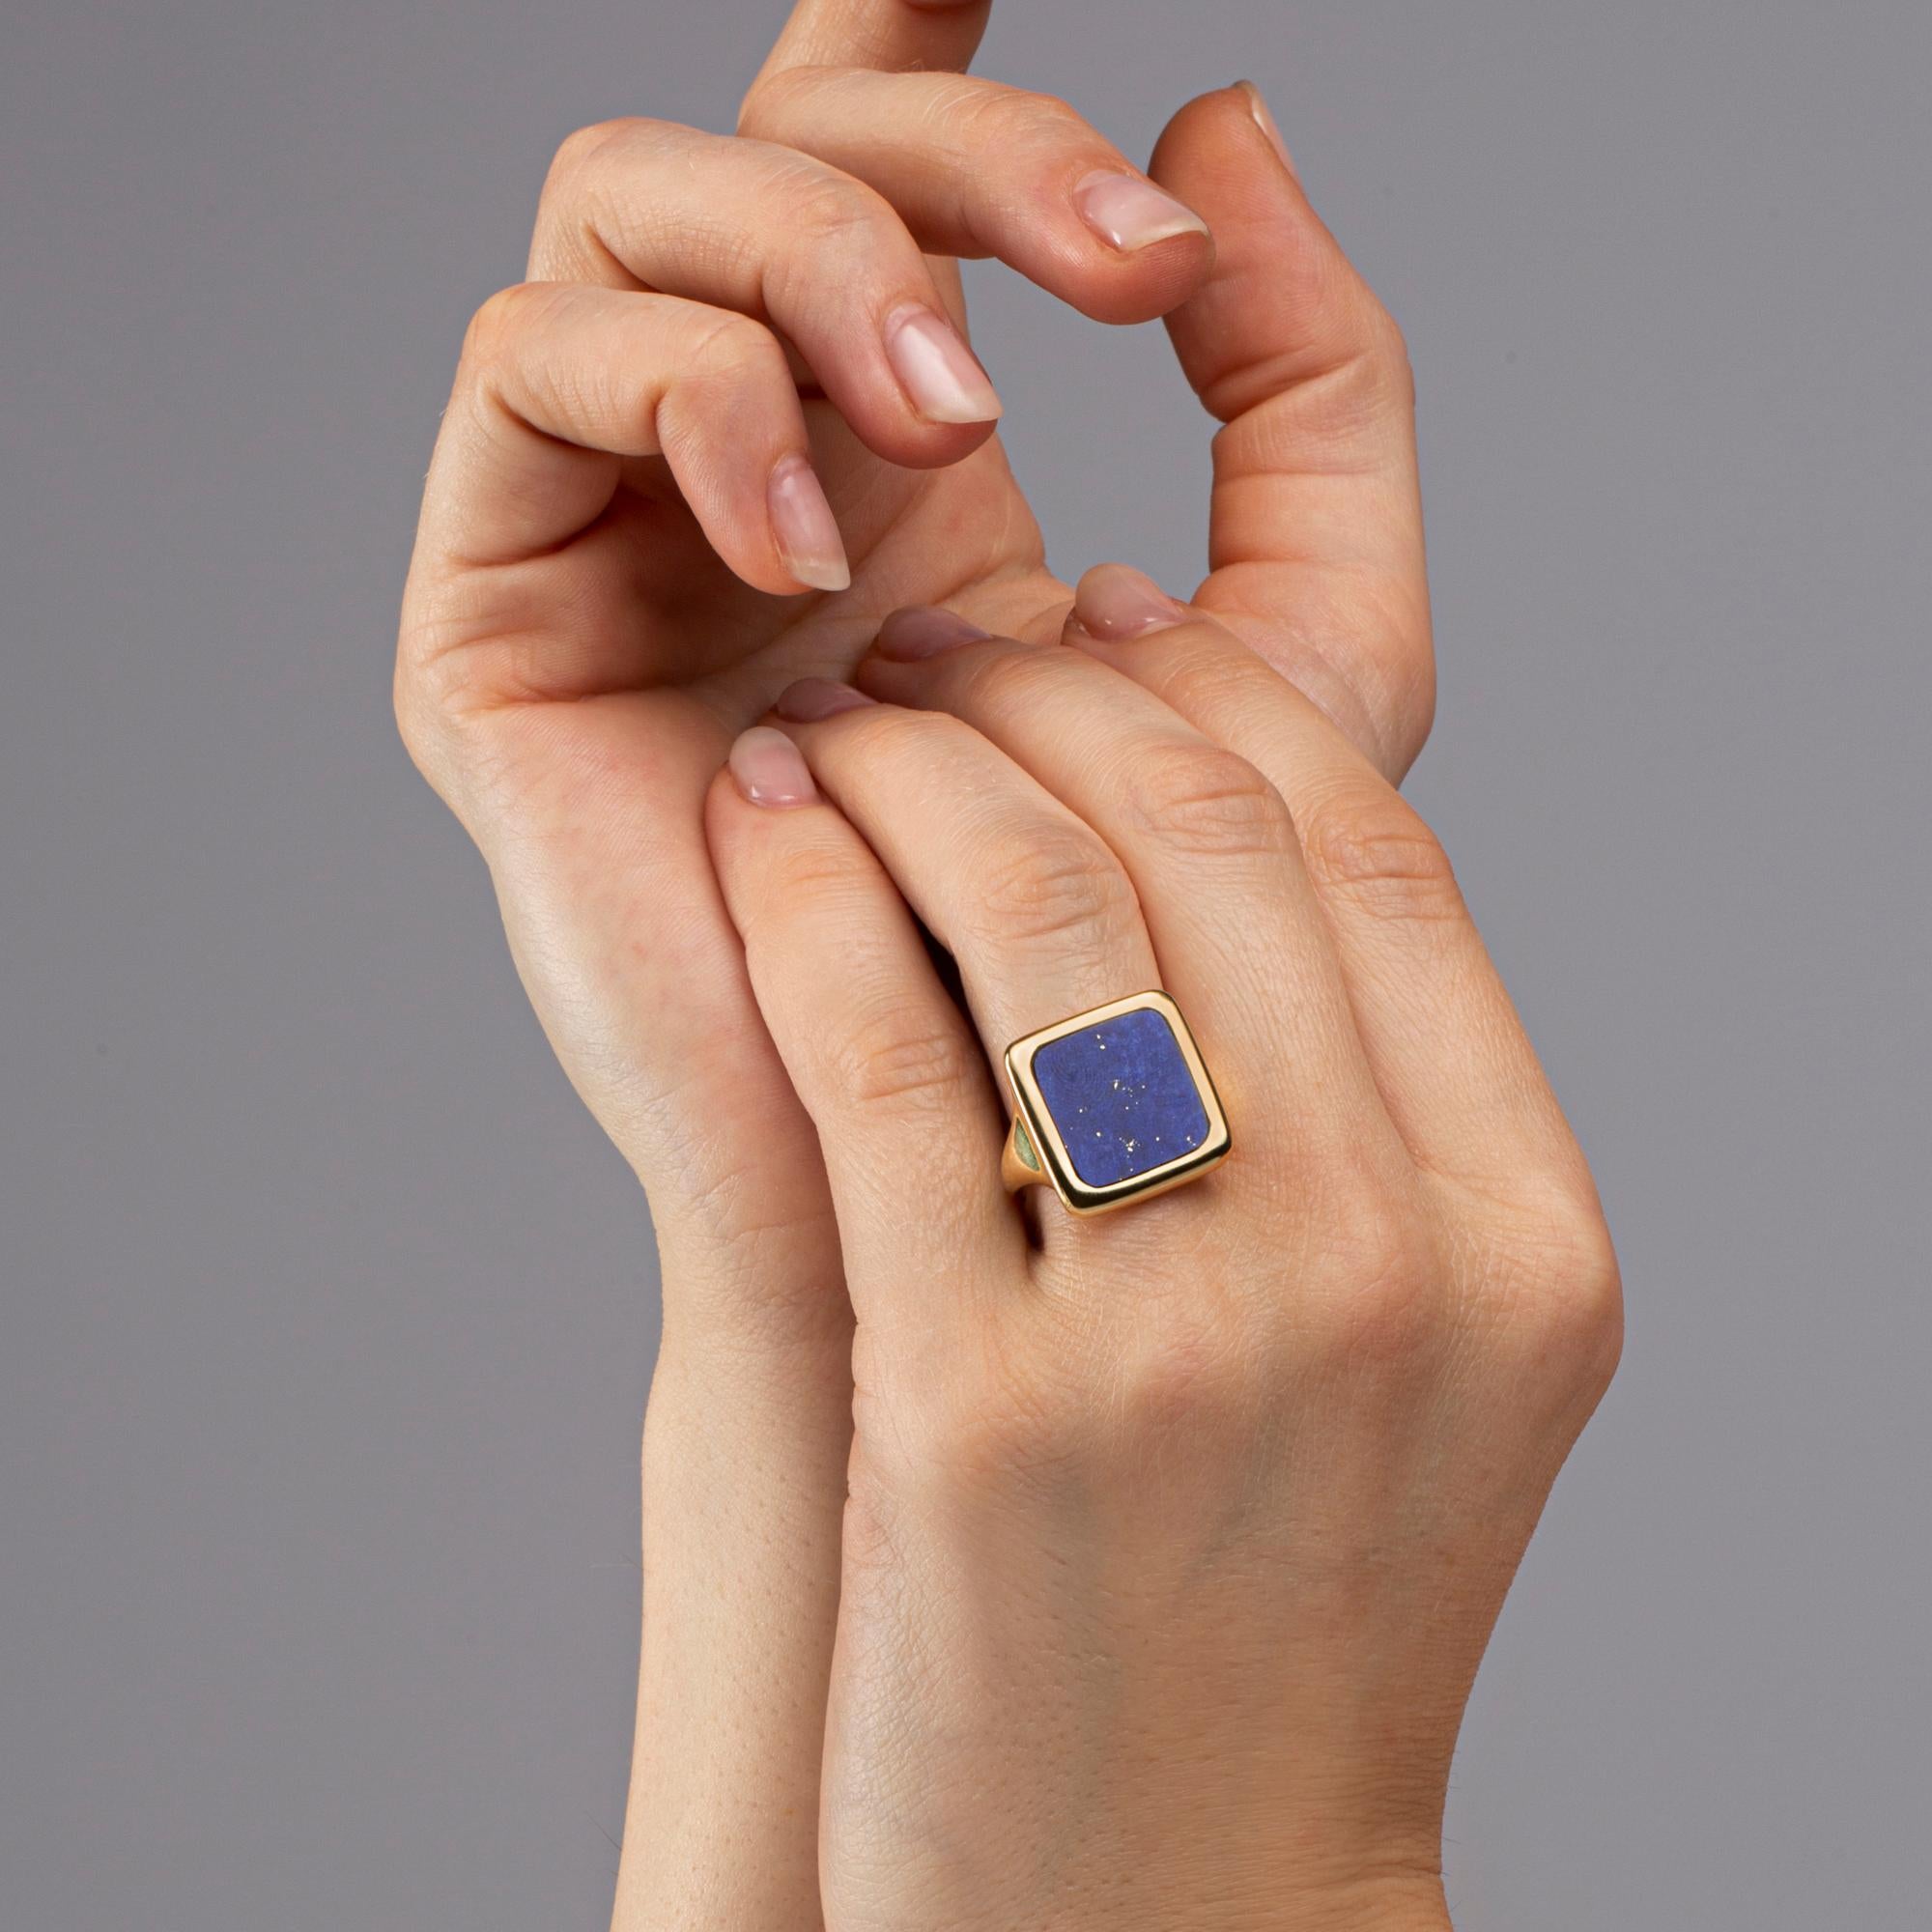 Alex Jona design collection, hand crafted in Italy, 18 Karat yellow gold ring set with a squared flat cut Lapis Lazuli. Size US 6 , can be sized to any specification.
Dimensions : H0.87 in. x W 0.68 in x D 0.68 in - H 22.11 mm x W 17.4 mm x D 3.72